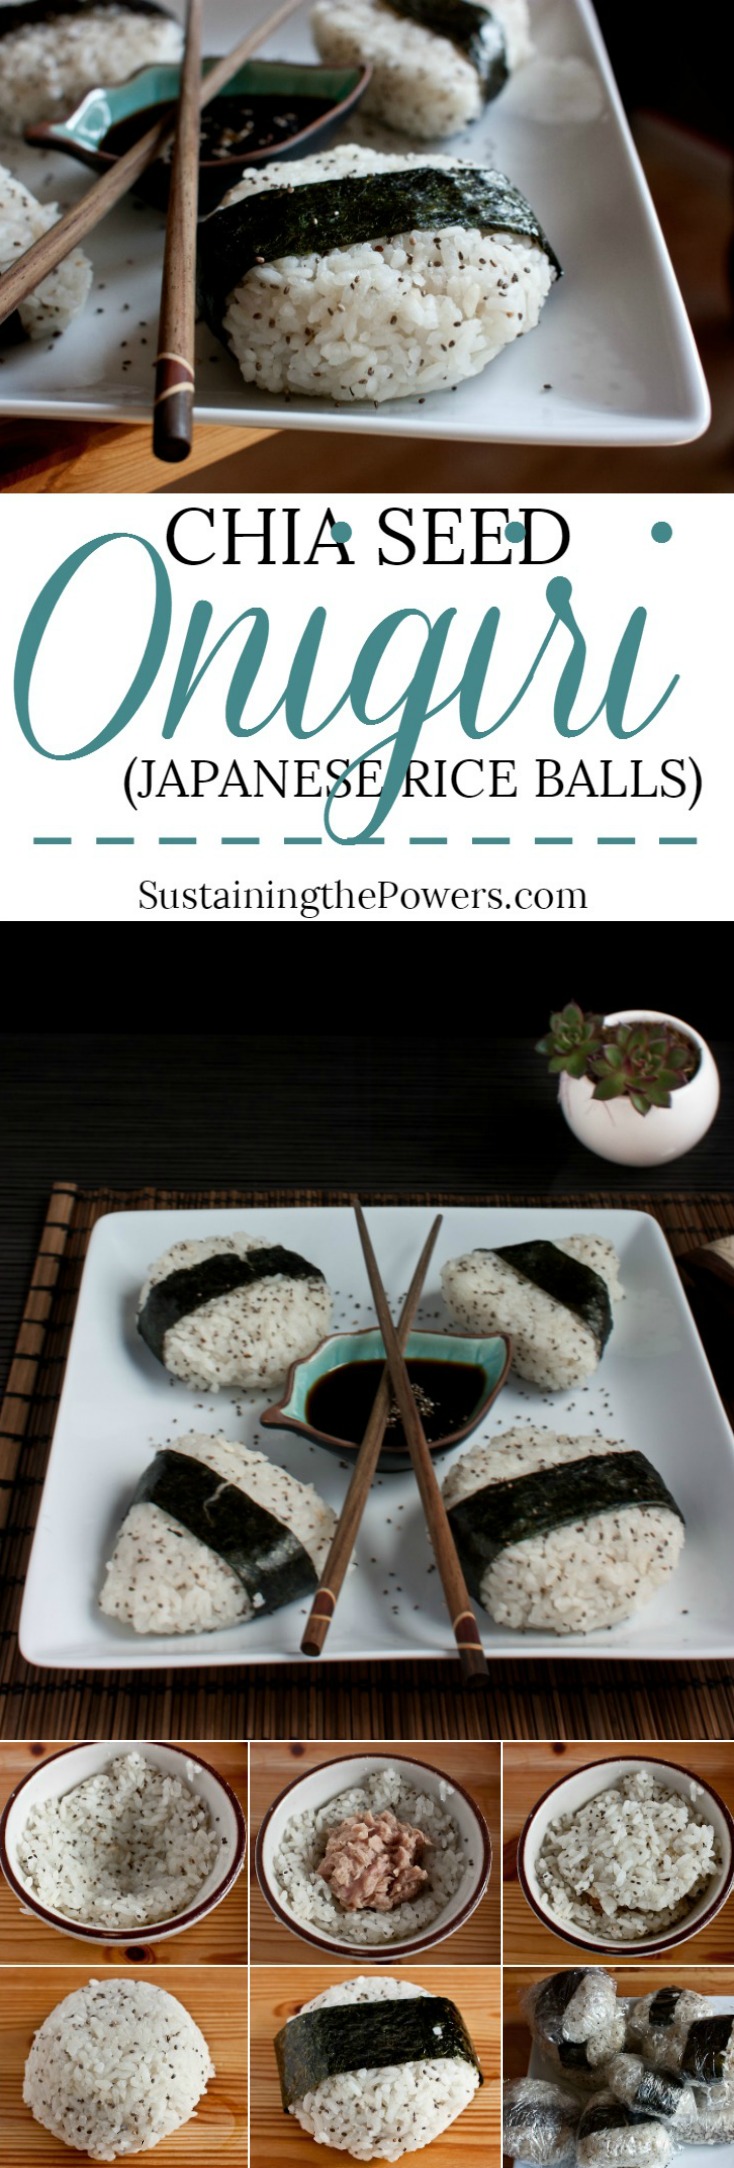 How to Make Chia Seed Onigiri | These Japanese Rice Balls are a lunchbox staple in Japan because they're so quick and delicious. I've upgraded the plain sticky rice to include all the benefits of chia seeds! Click through to learn how to make these! 